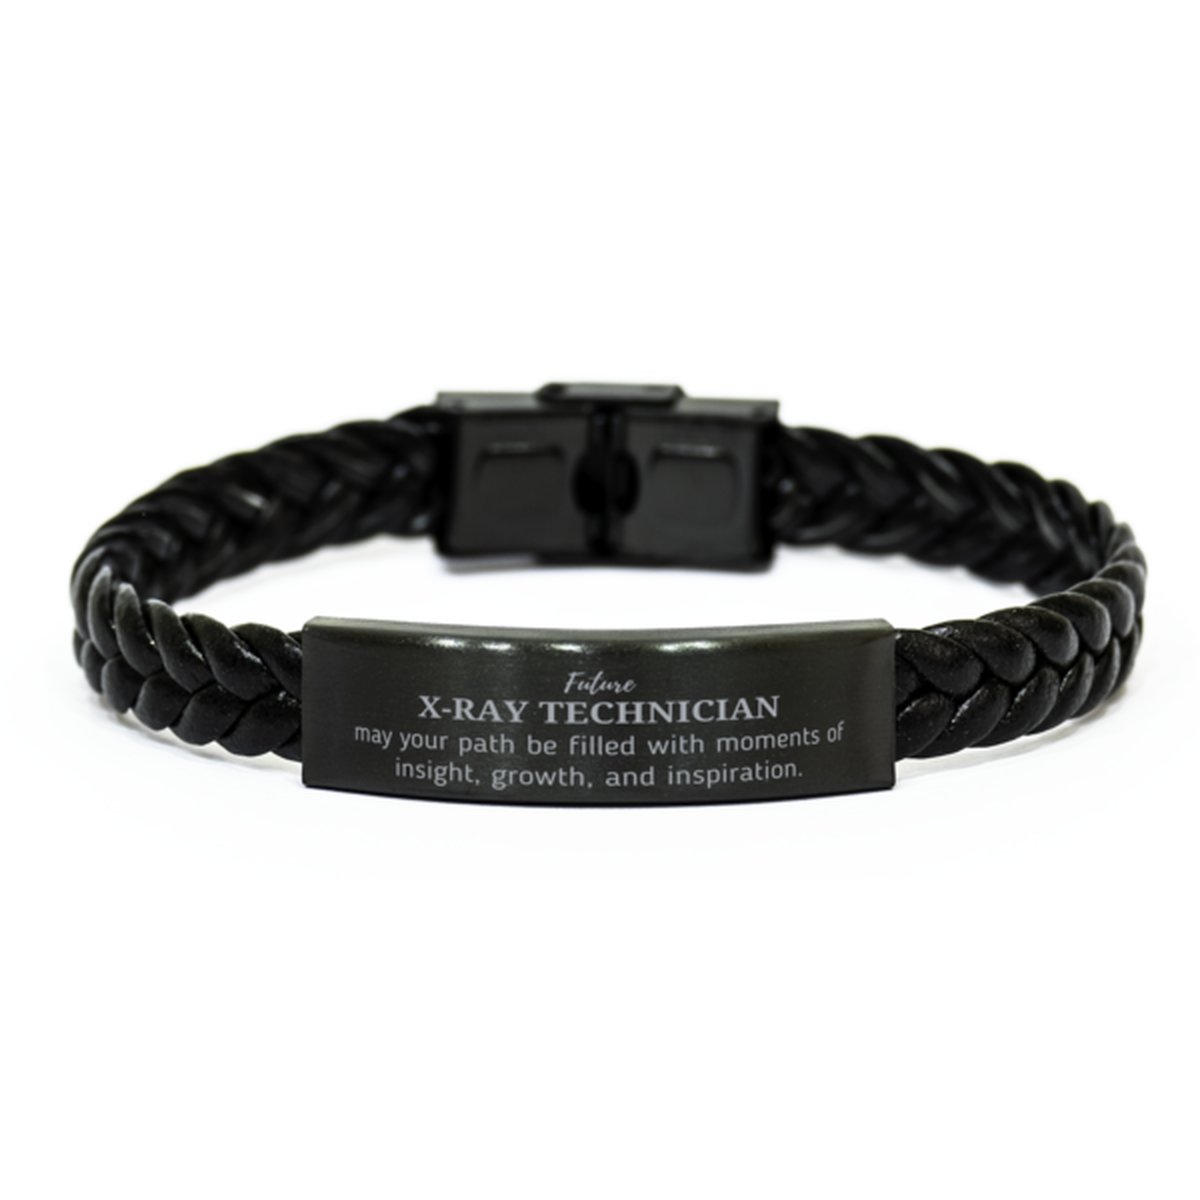 Future X-Ray Technician Gifts, May your path be filled with moments of insight, Graduation Gifts for New X-Ray Technician, Christmas Unique Braided Leather Bracelet For Men, Women, Friends